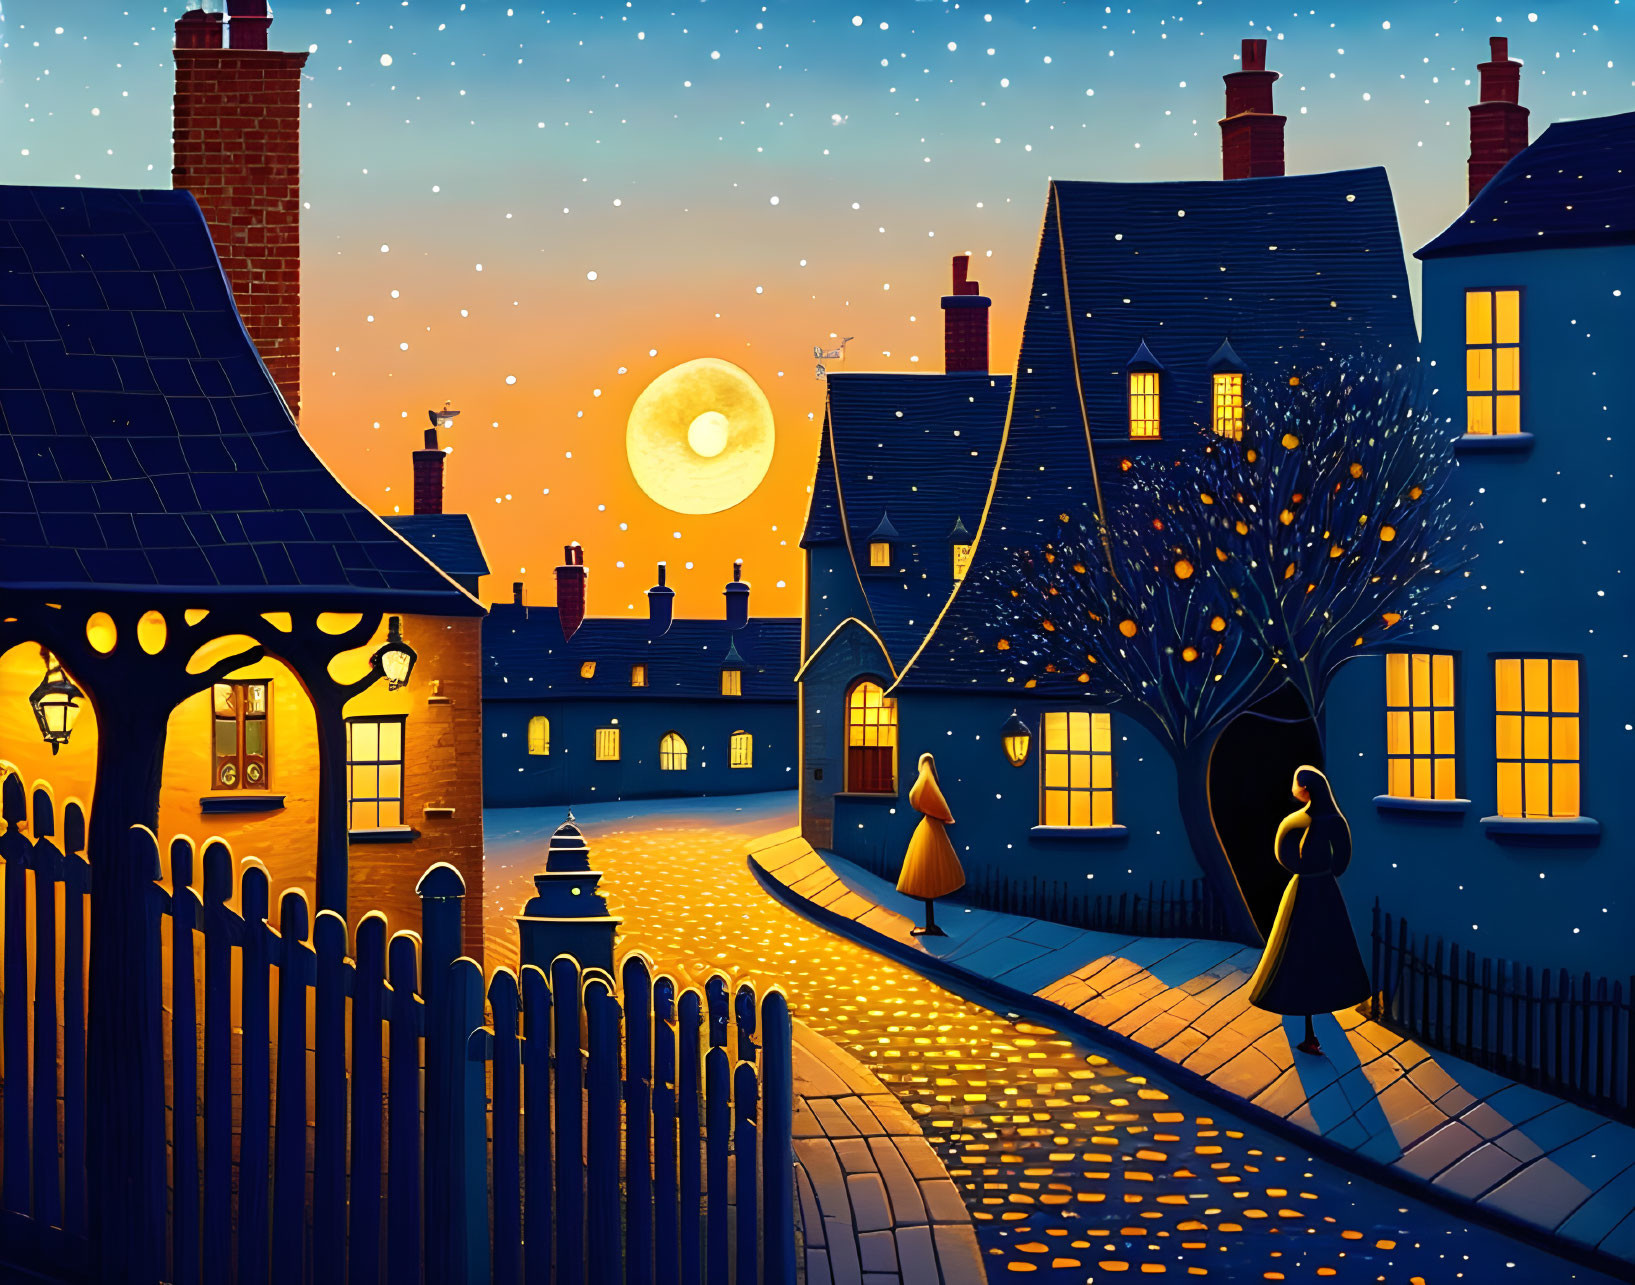 Quaint village night scene with silhouetted figures, full moon, and starry sky